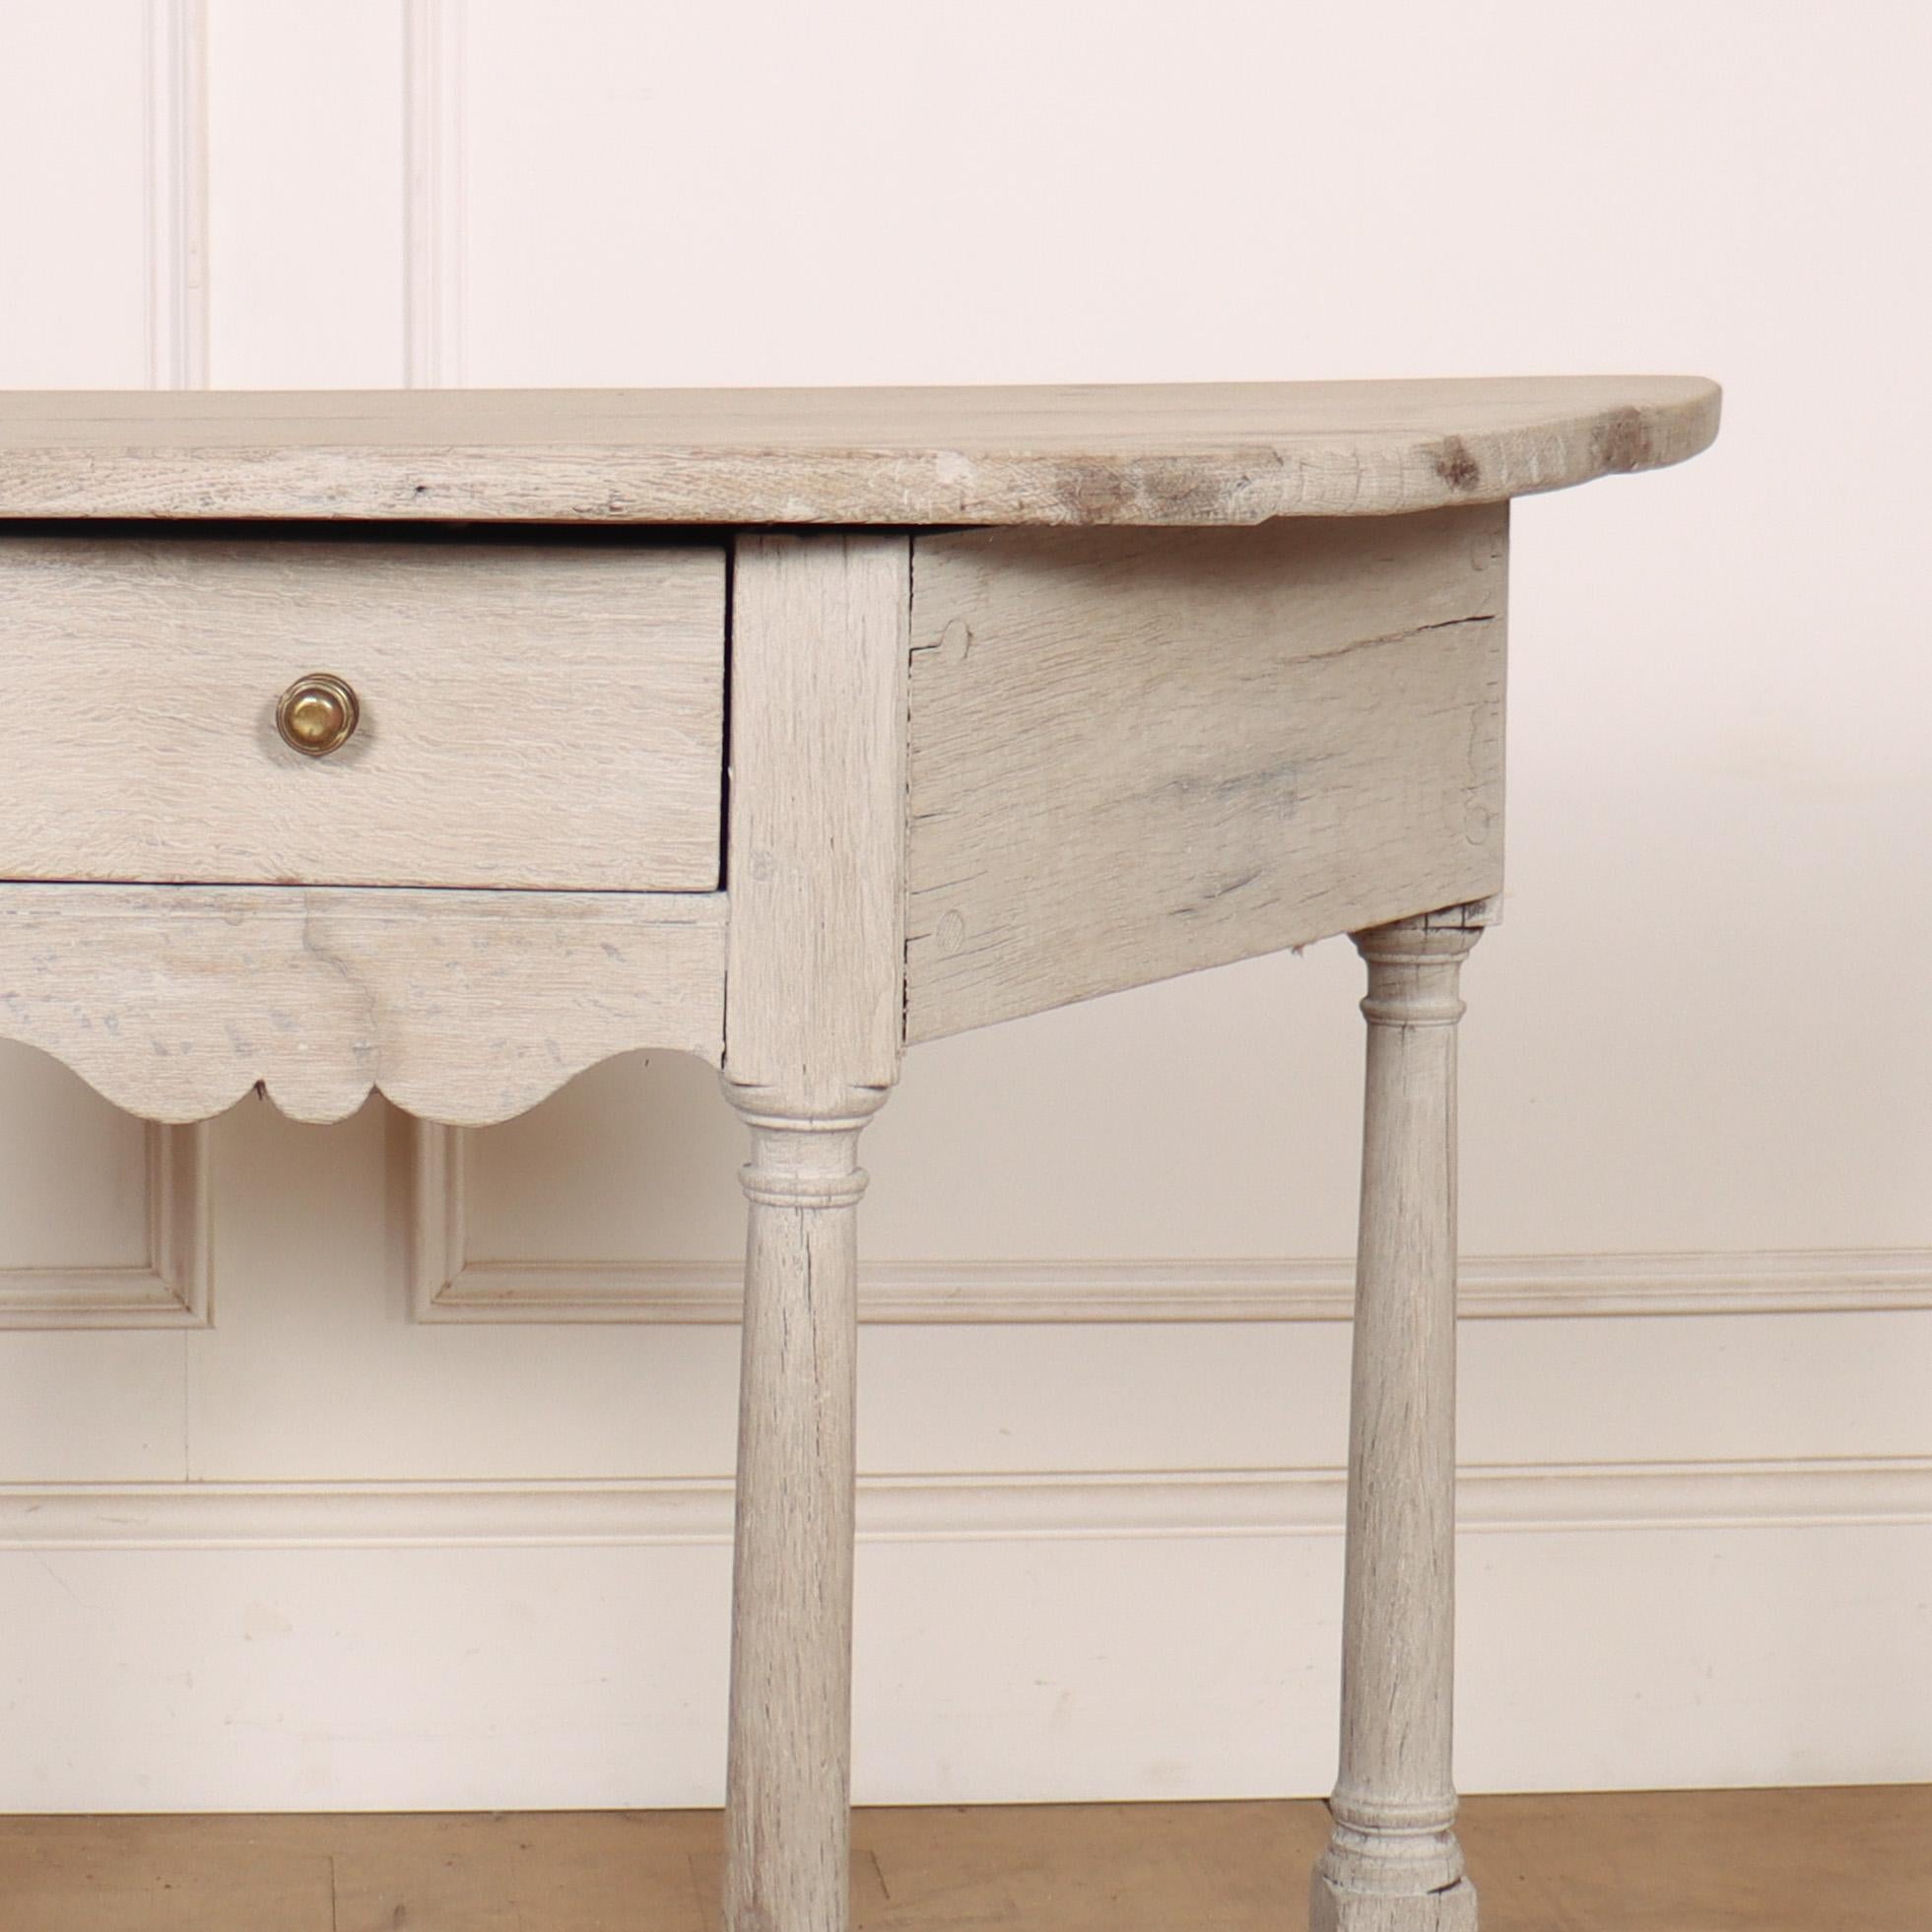 English bleached oak console table made from 18th C components. 1800.

Reference: 8053

Dimensions
34.5 inches (88 cms) Wide
16 inches (41 cms) Deep
30 inches (76 cms) High